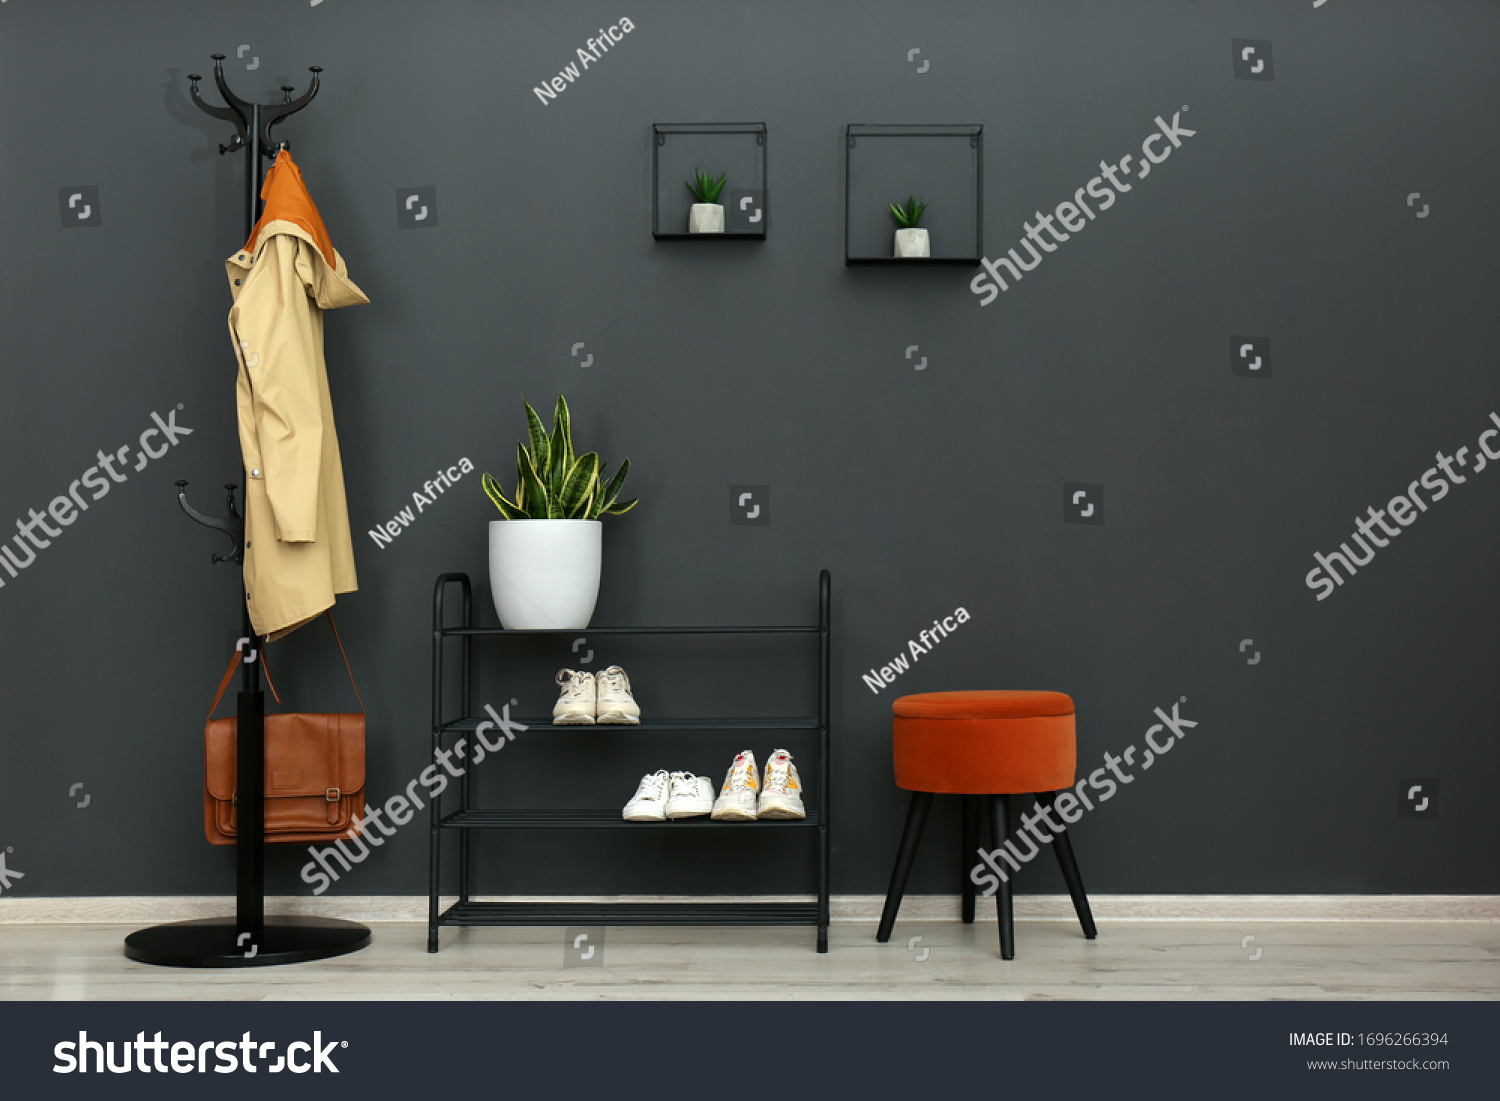 Hallway interior with stylish furniture, clothes and accessories #1696266394